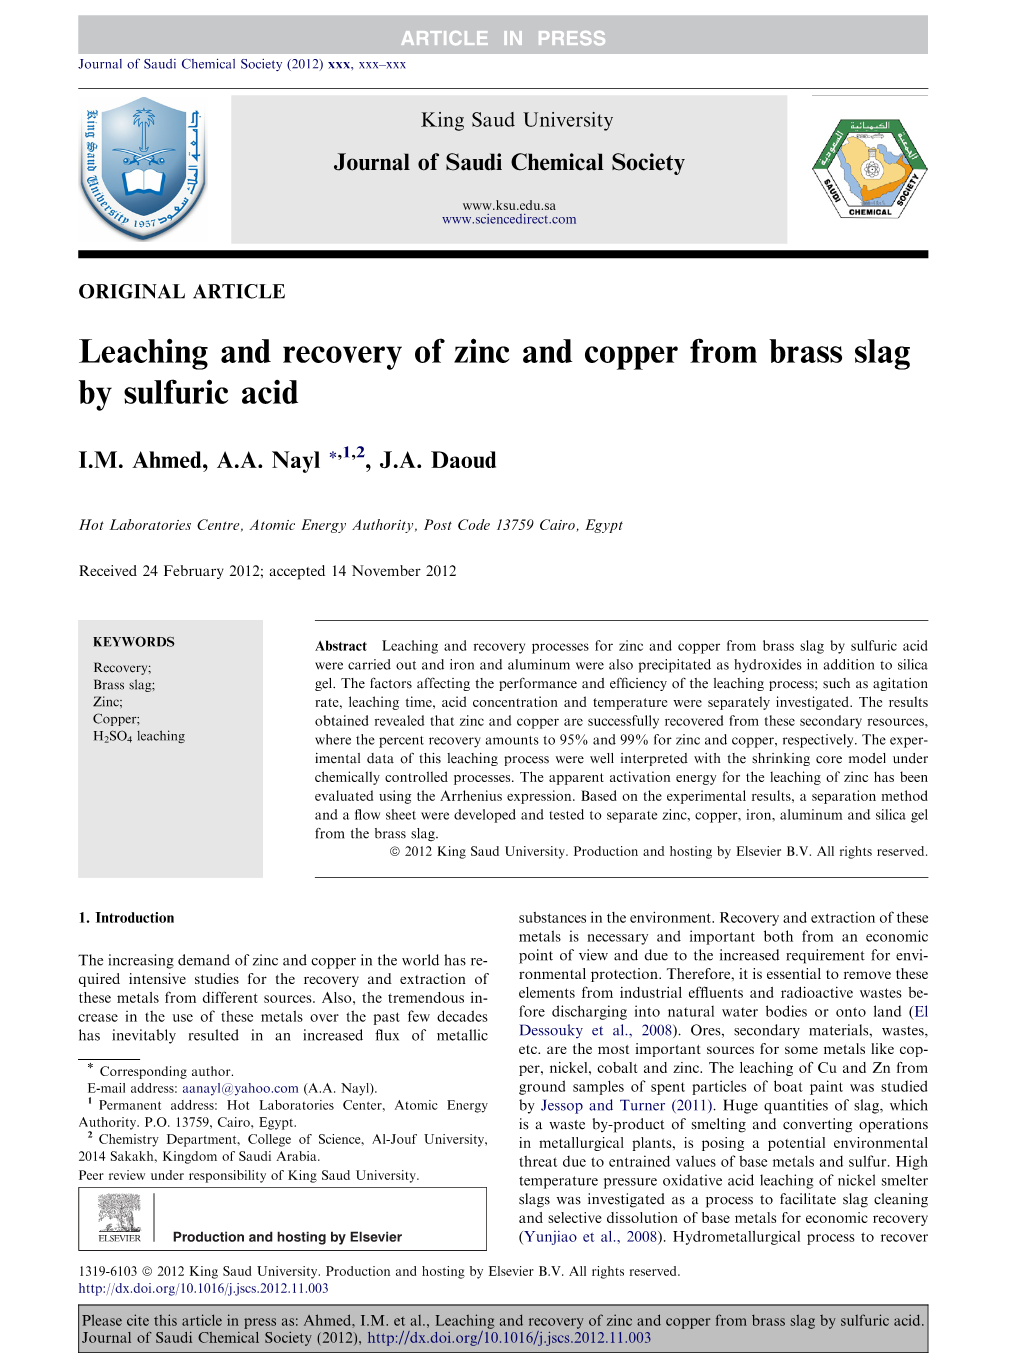 Leaching and Recovery of Zinc and Copper from Brass Slag by Sulfuric Acid